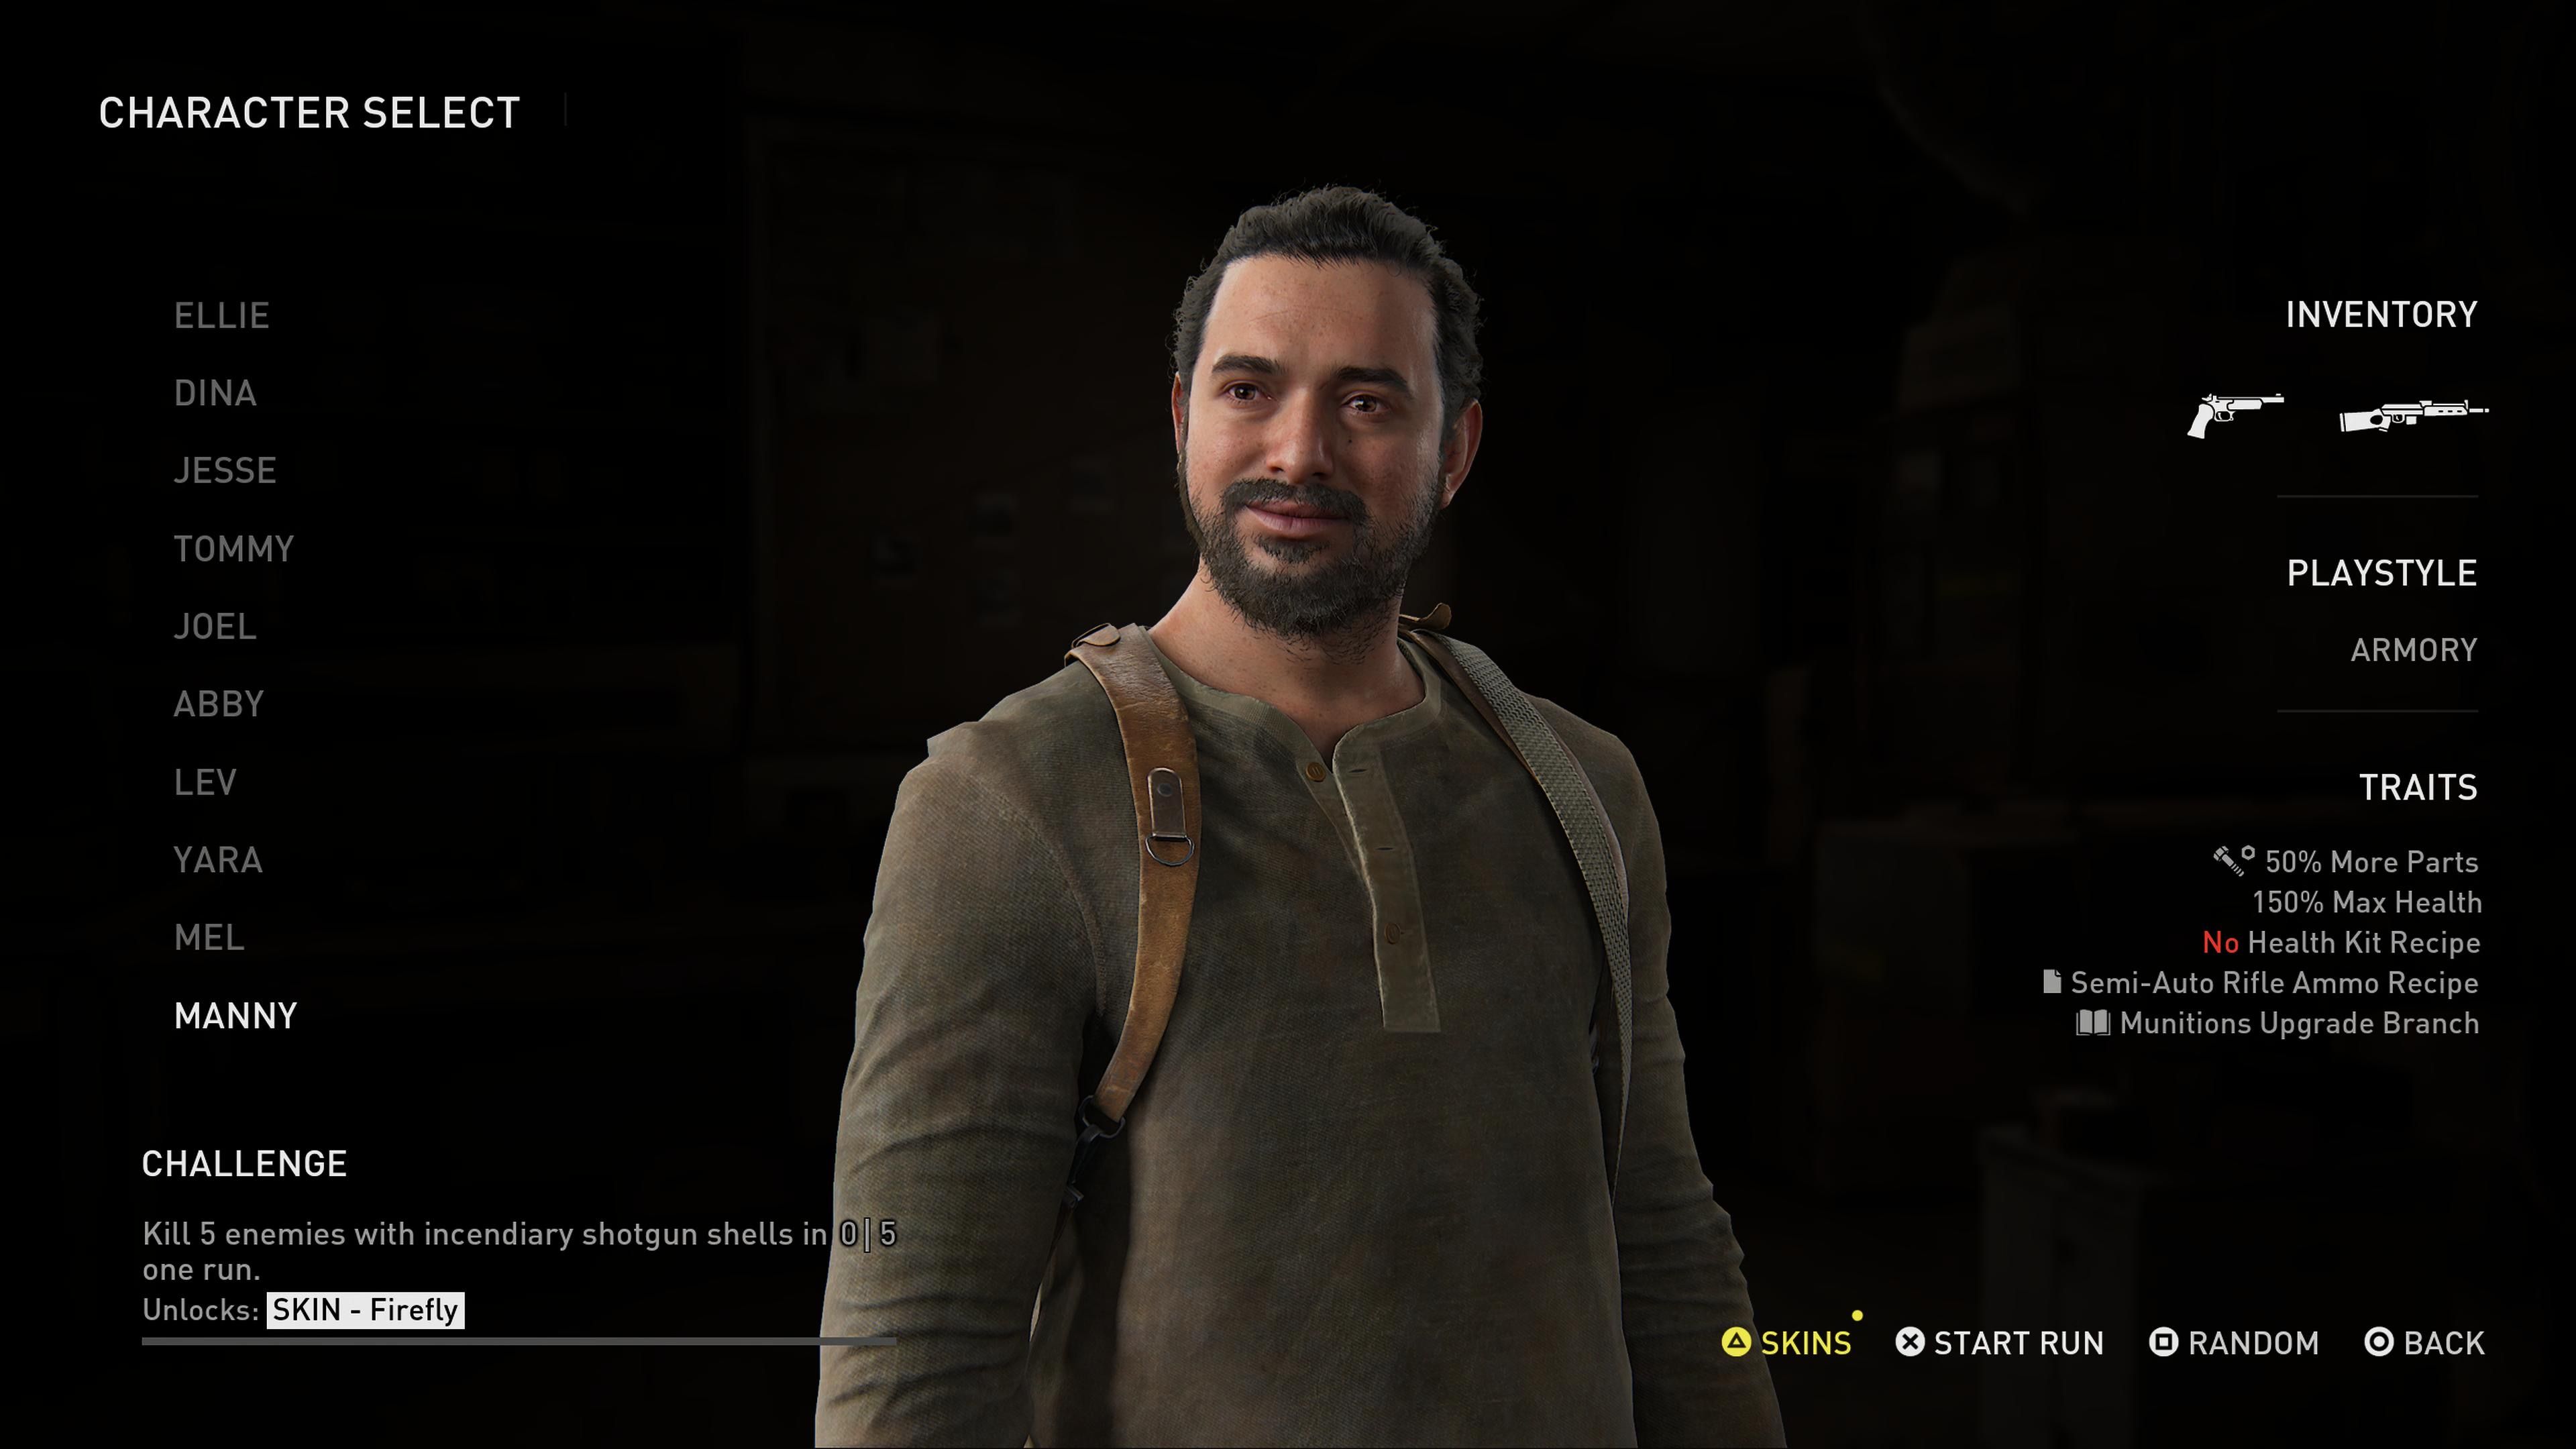 Manny from The Last of Us 2 standing in the middle of the character selection screen for the No Return game mode.